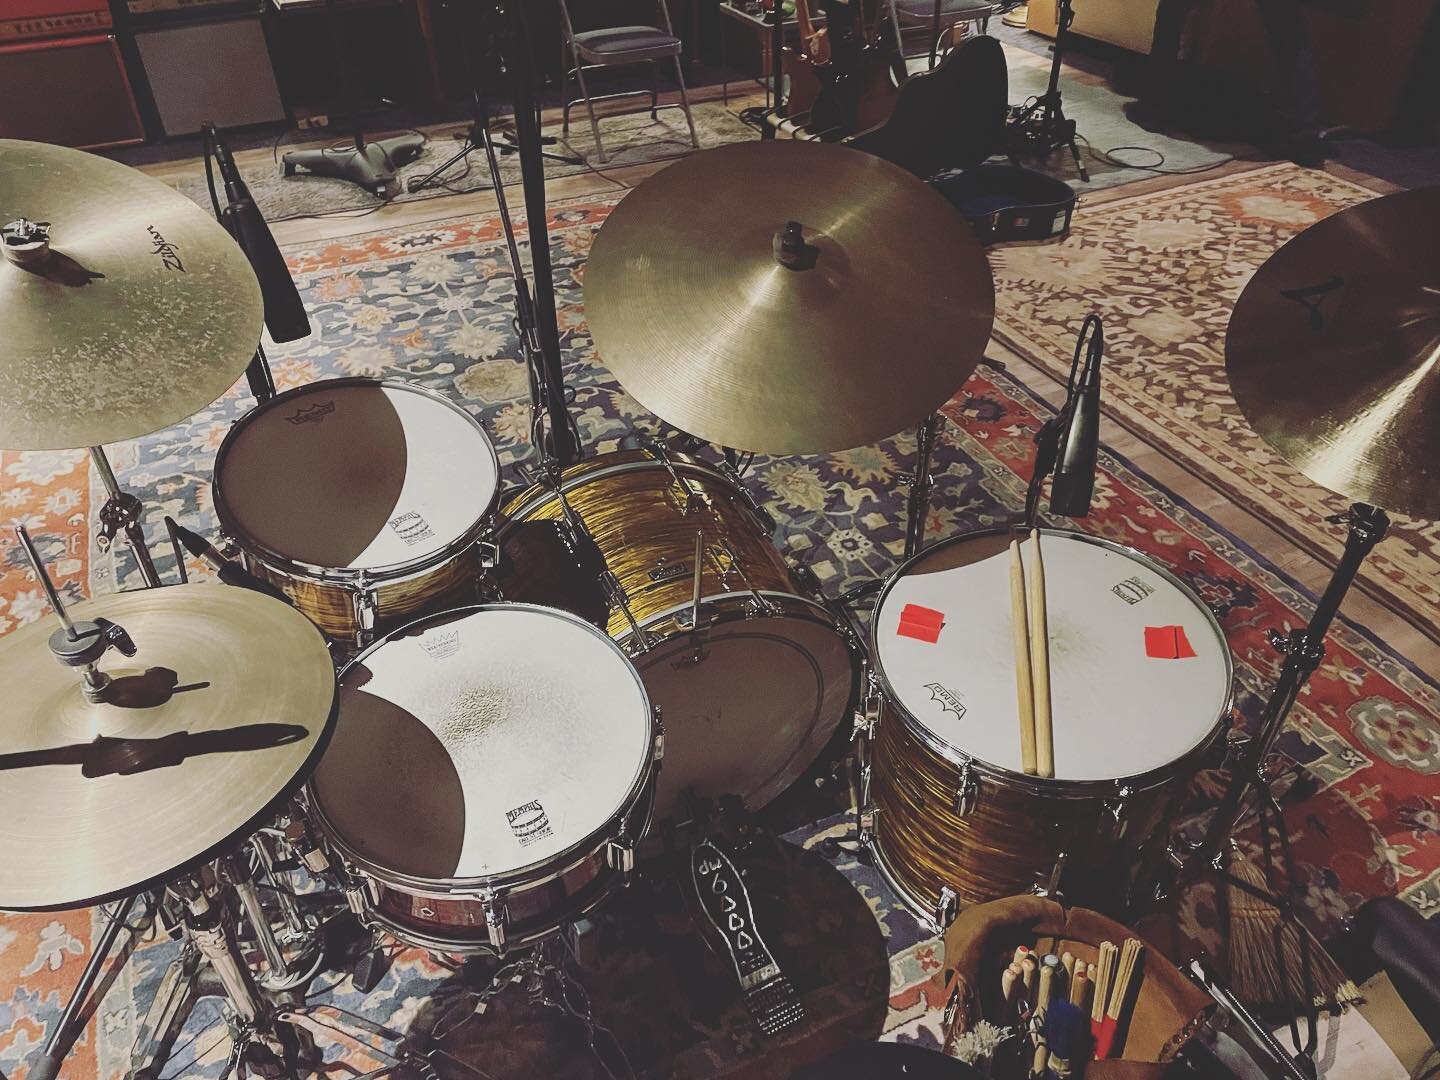 Been spending a lot of time recording this kit in this studio the last couple weeks. I have a bad habit of tempering a lot of what I say on here behind some ironic distance but it really just is one of the great joys of my life to play the drums.